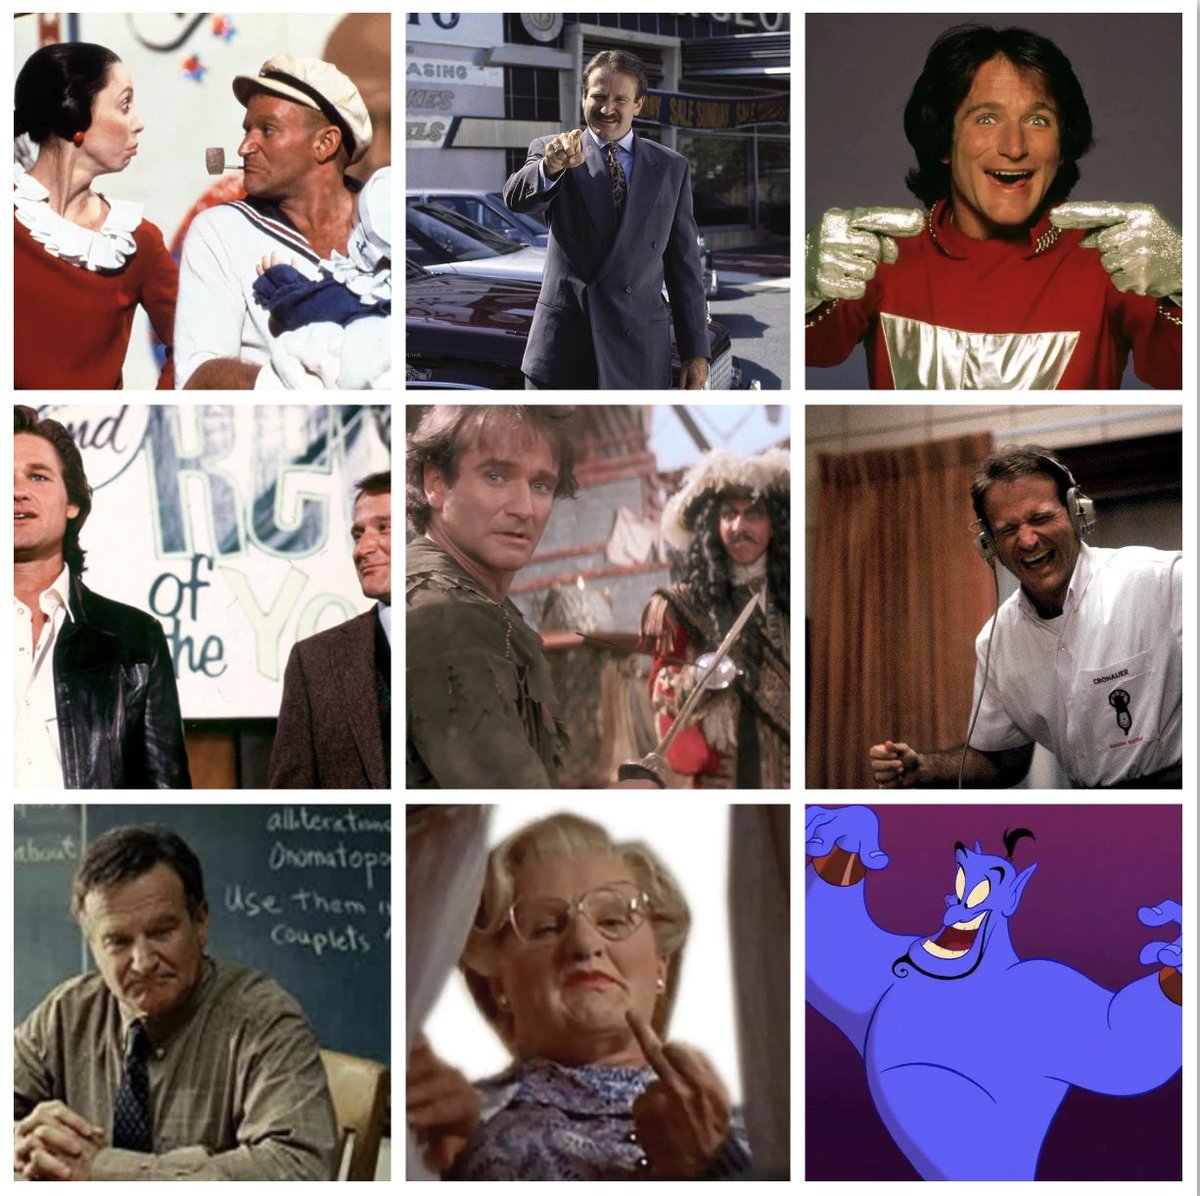 Remembering Robin Williams on what would have been his 72nd birthday.. 
July 21, 1951 - August 11, 2014
#HappyBirthday #RobinWilliams https://t.co/bFf1vNftfl